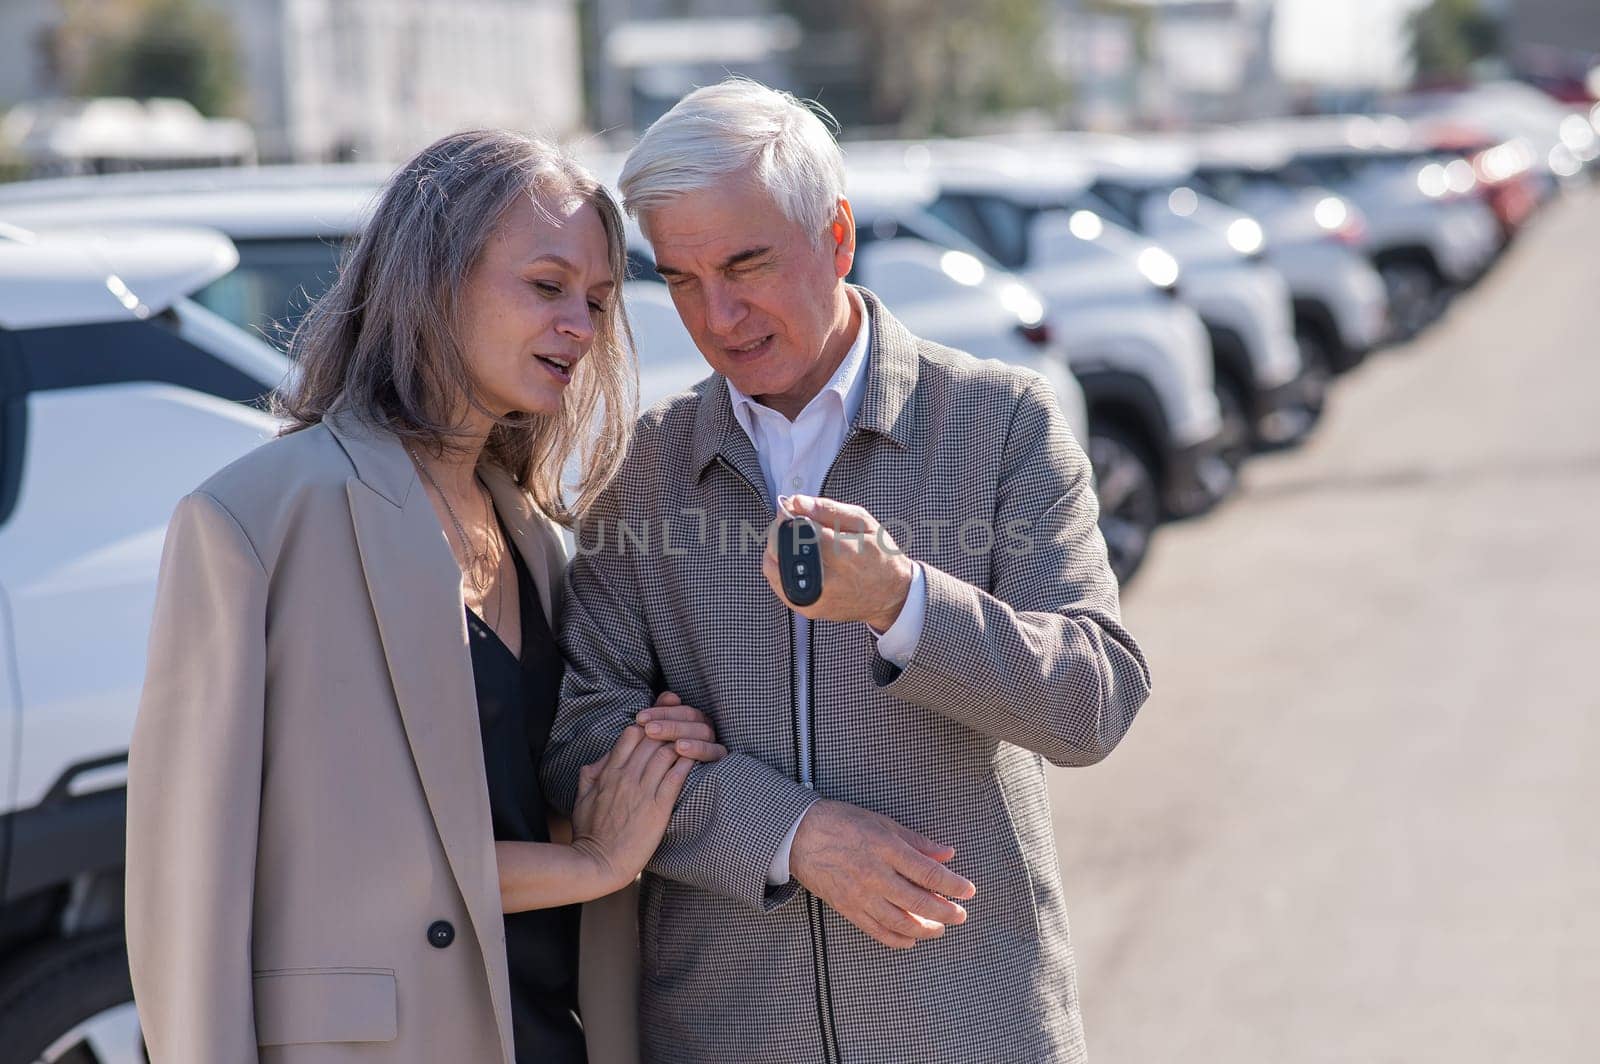 Mature Caucasian couple standing by a car outdoors. Elderly man holding car keys. by mrwed54